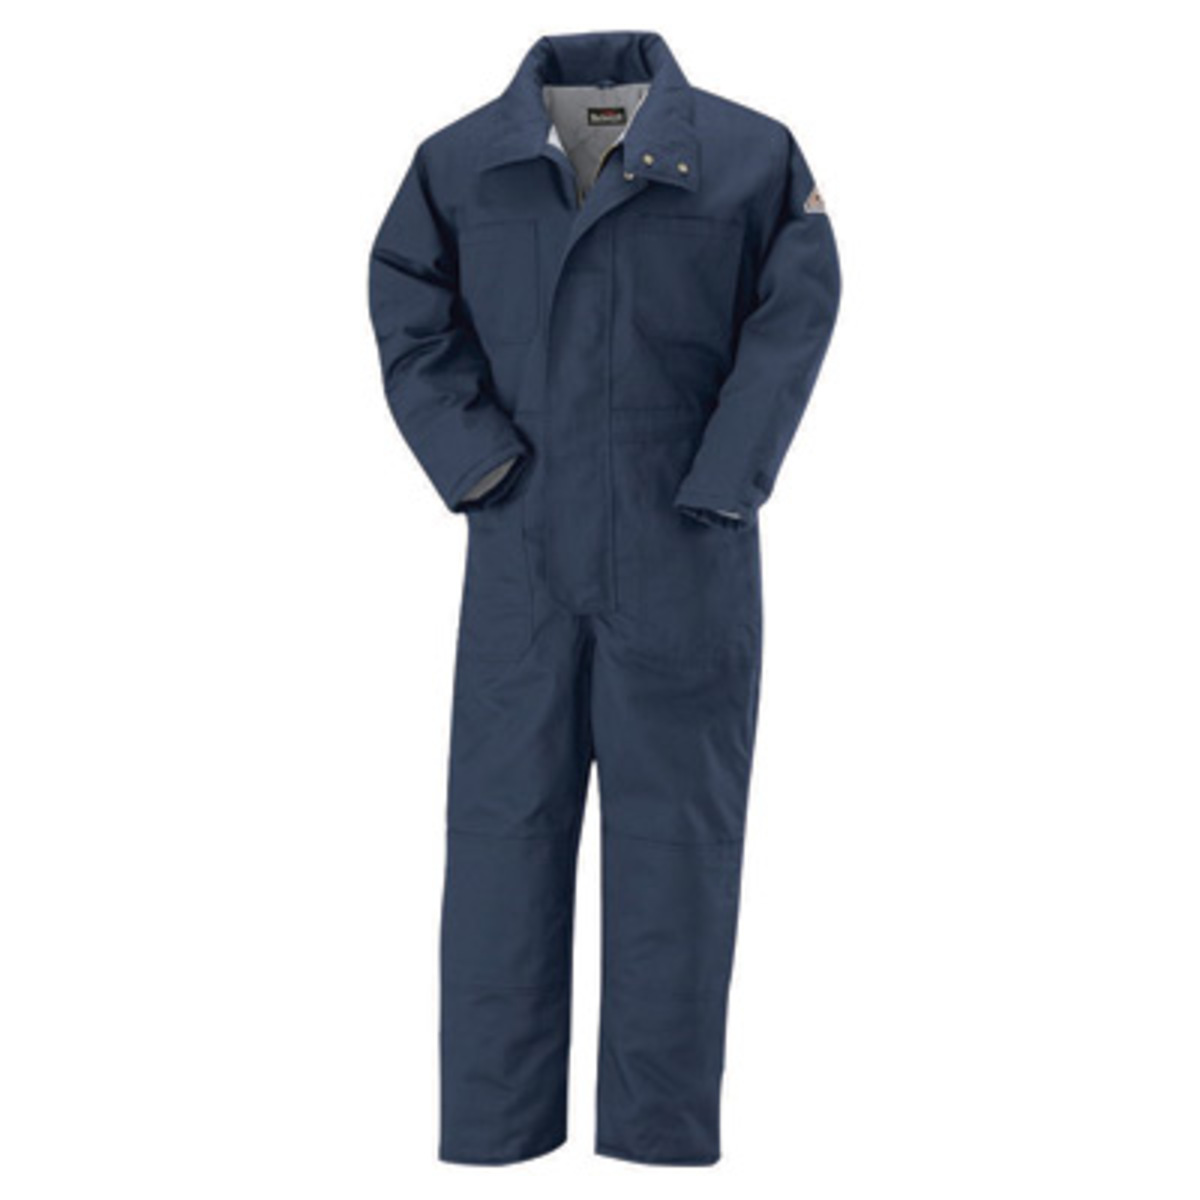 Bulwark® 4X Regular Navy Blue Westex Ultrasoft® Twill/Cotton/Nylon Water Repellent Flame Resistant Coveralls With Cotton Lining